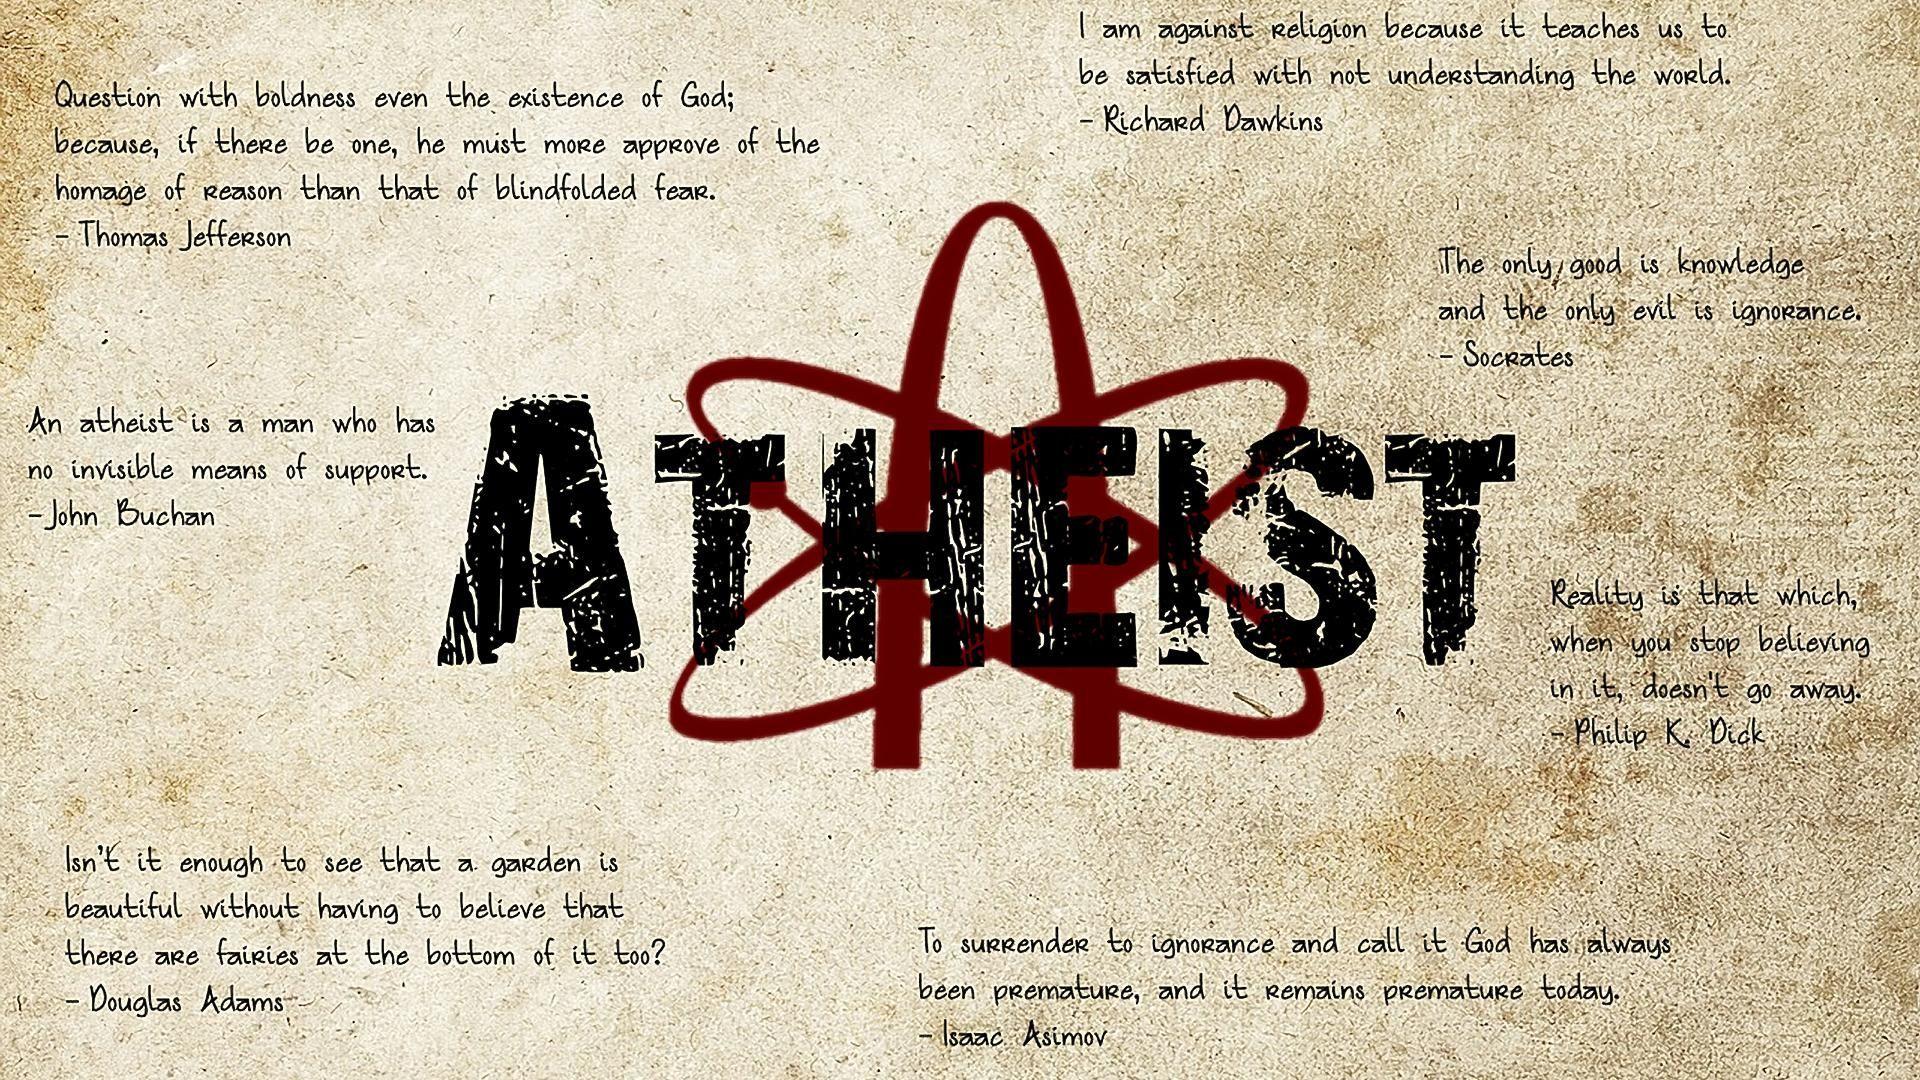 Atheist HD #Wallpaper 1080p. Aethism. Atheist quotes